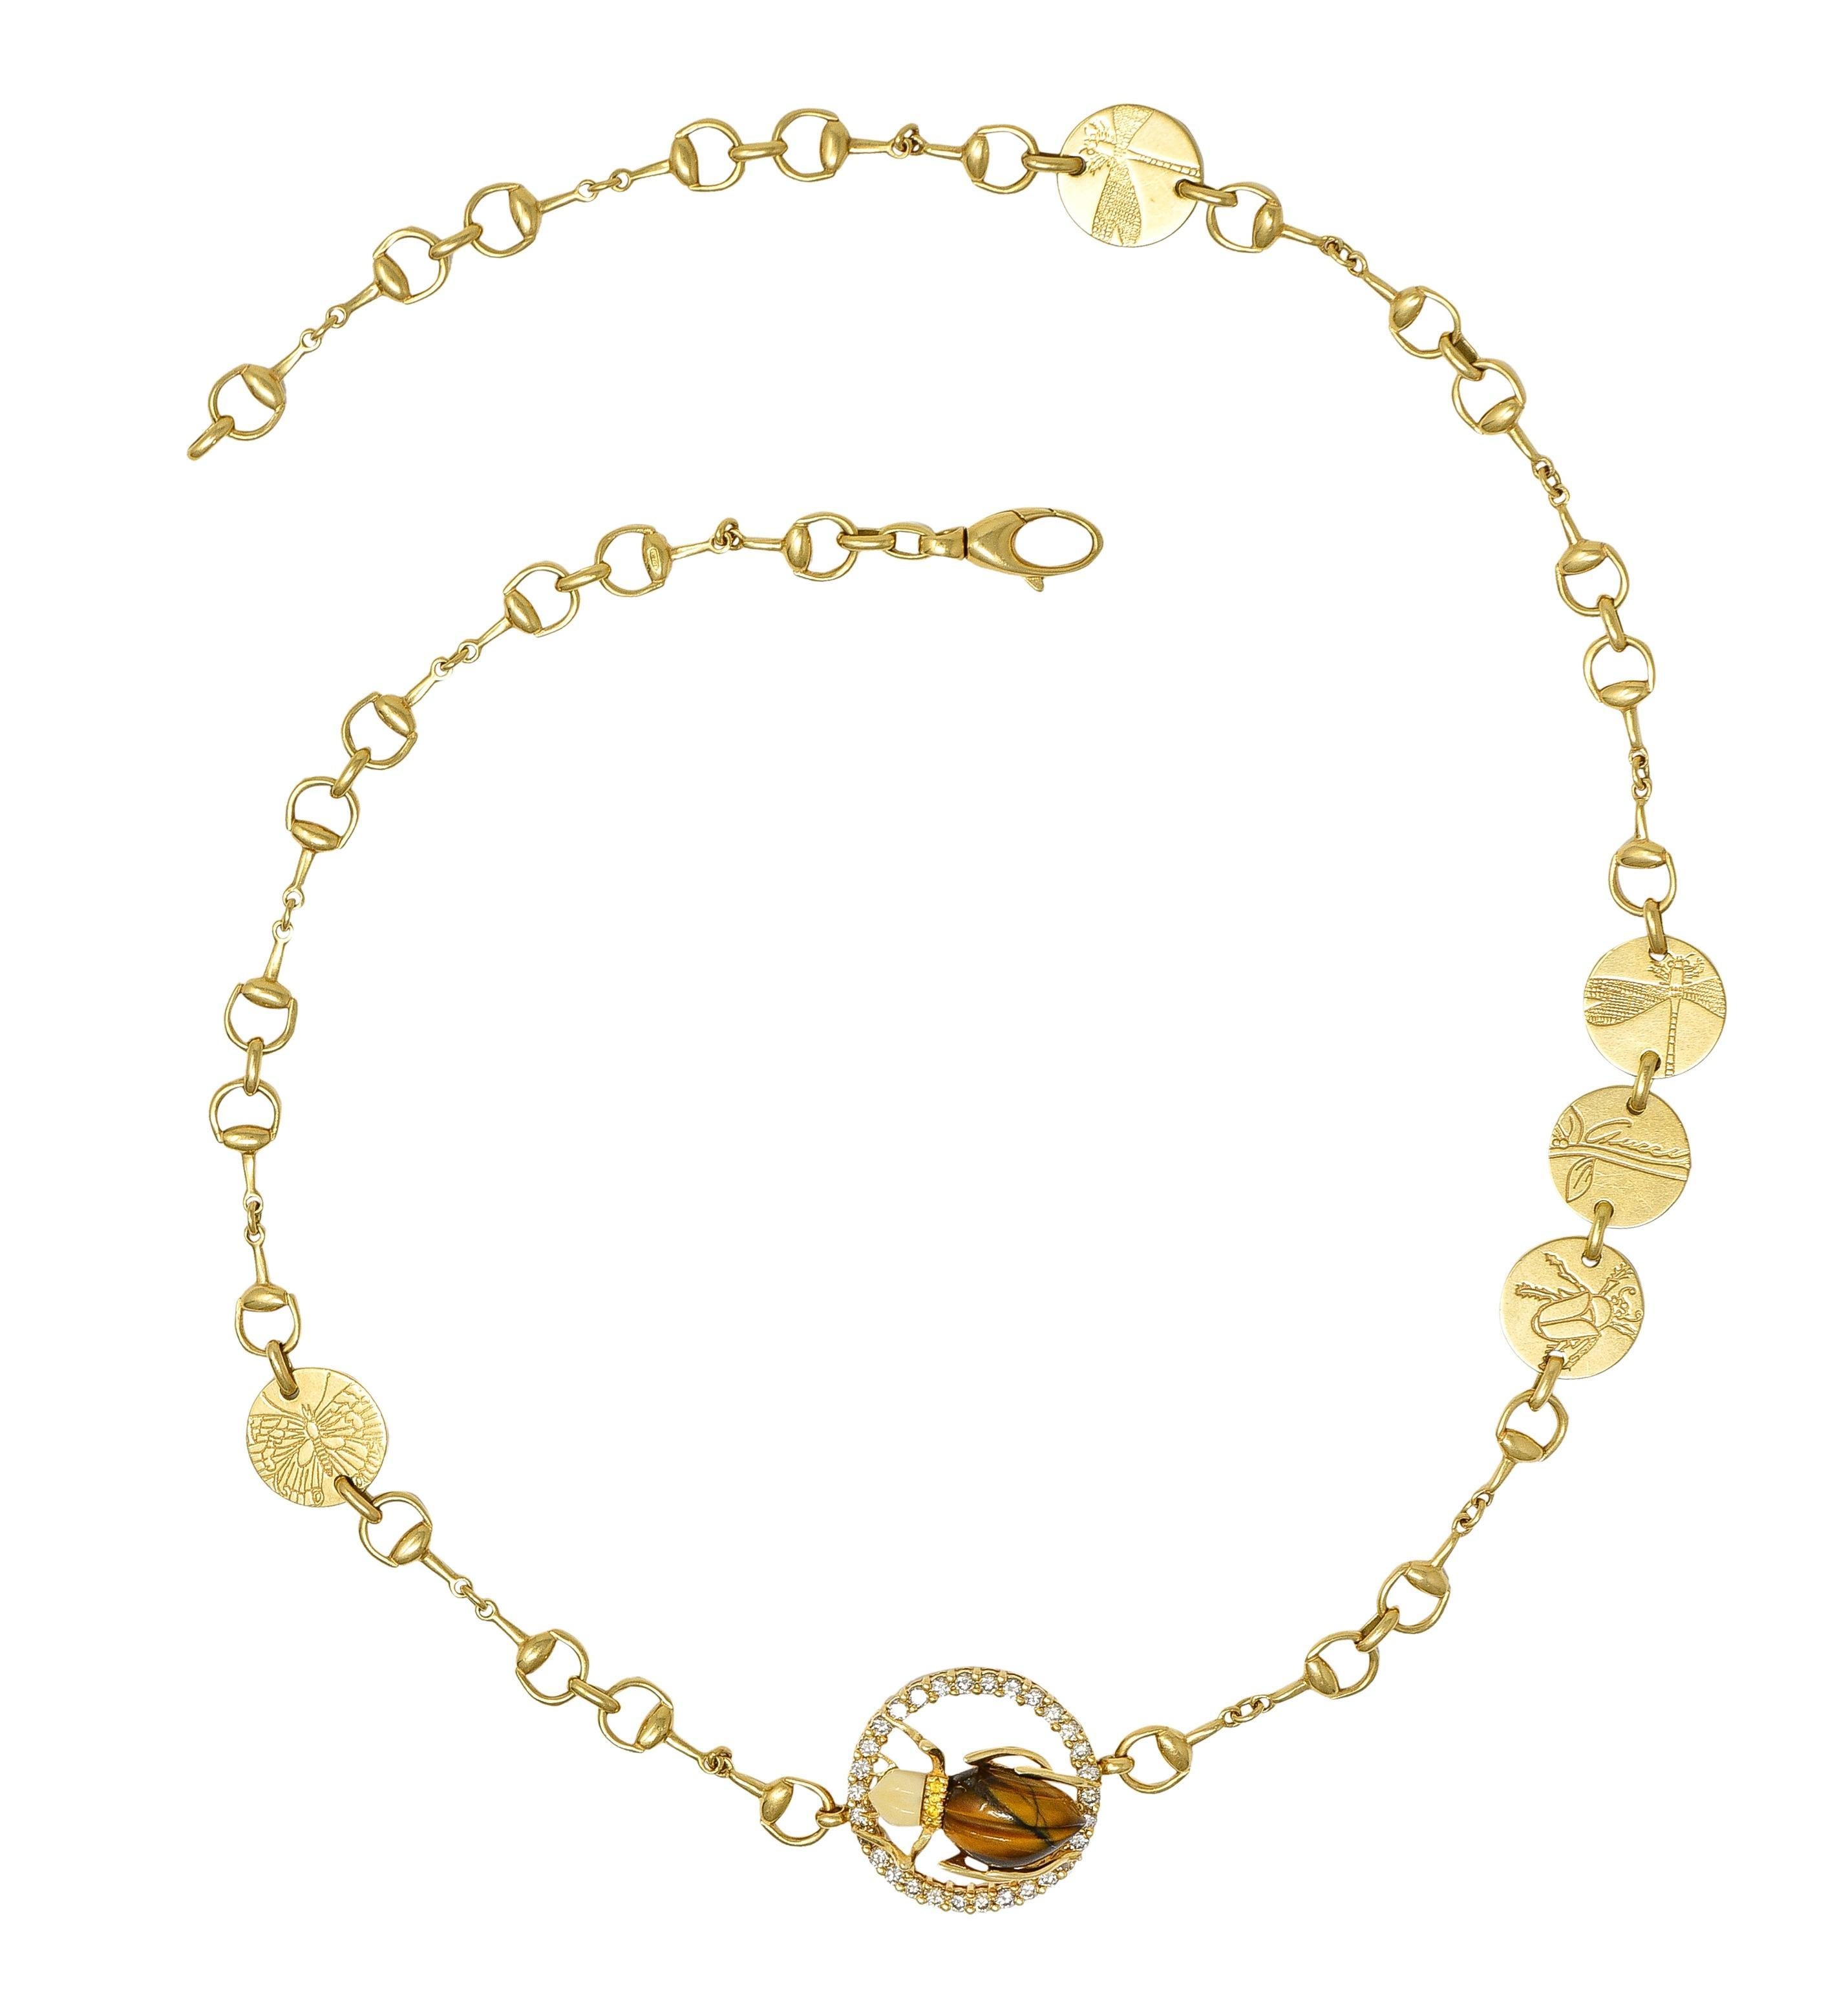 Designed as a horse-bit motif link chain with round disk stations engraved with insects and flowers
Featuring a large pierced disk station centering a dimensional scarab beetle 
With body carved from tiger's eye quartz and head carved from